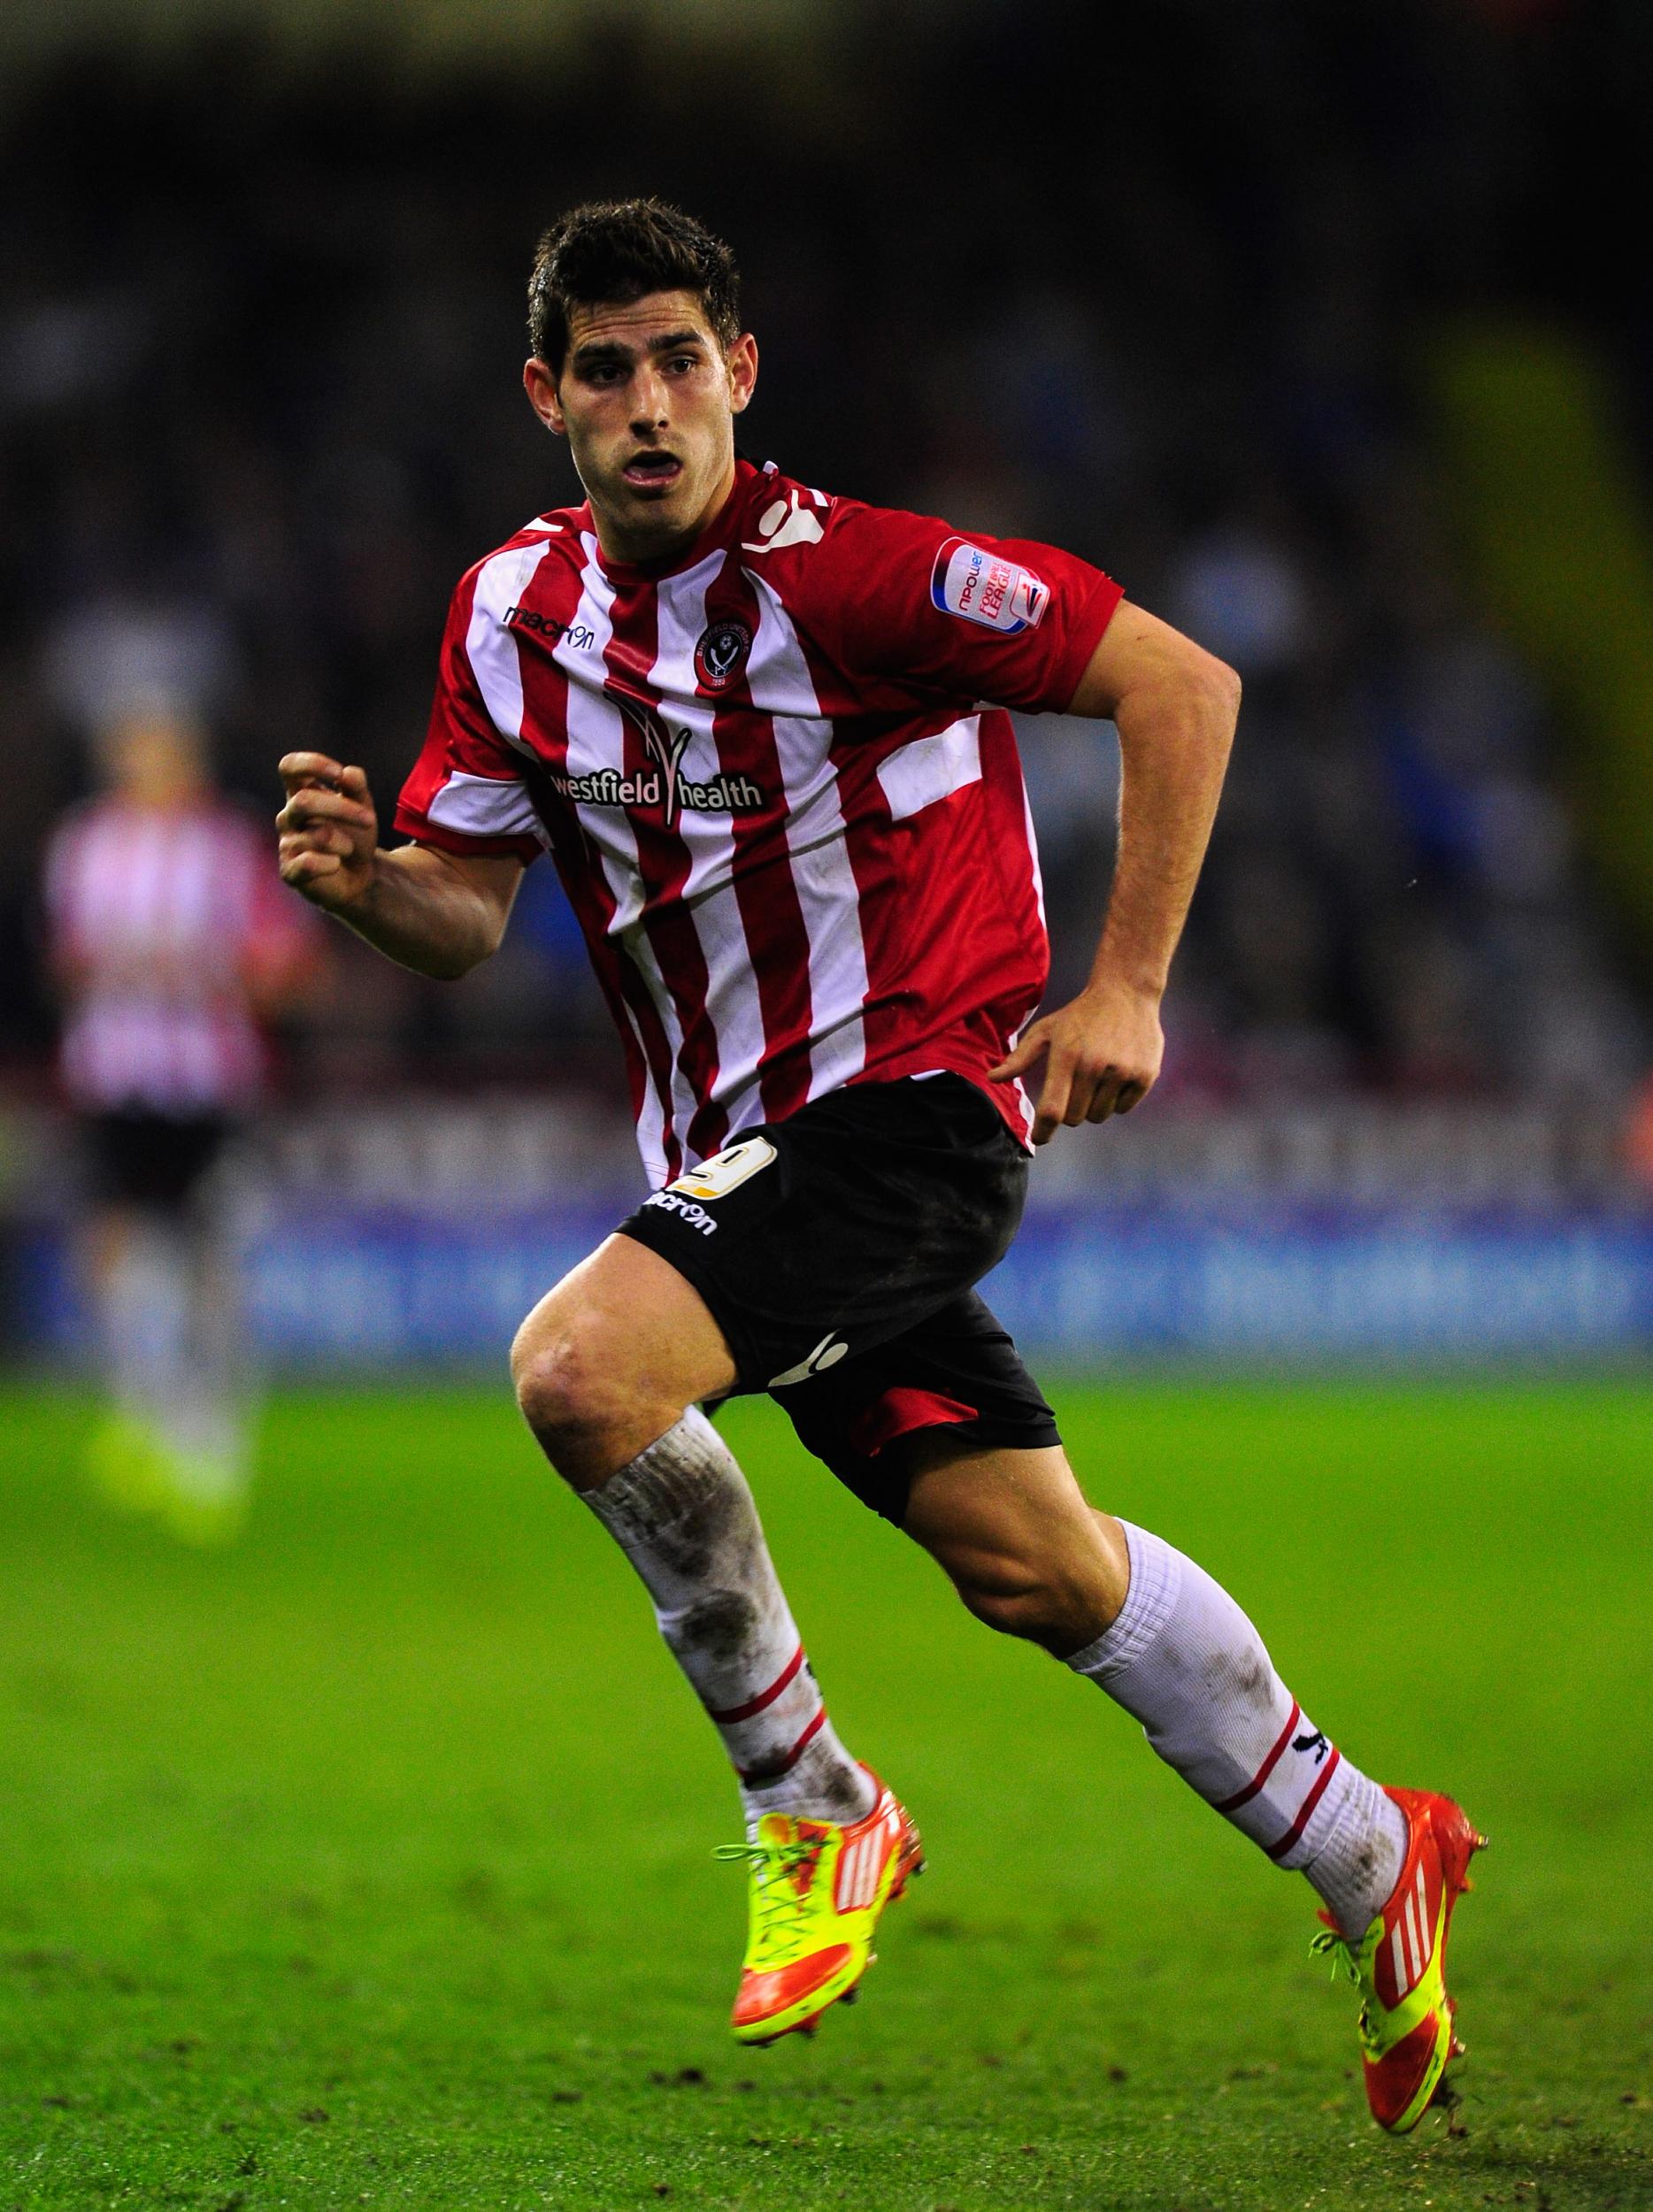 Evans was one of Sheffield United's best players